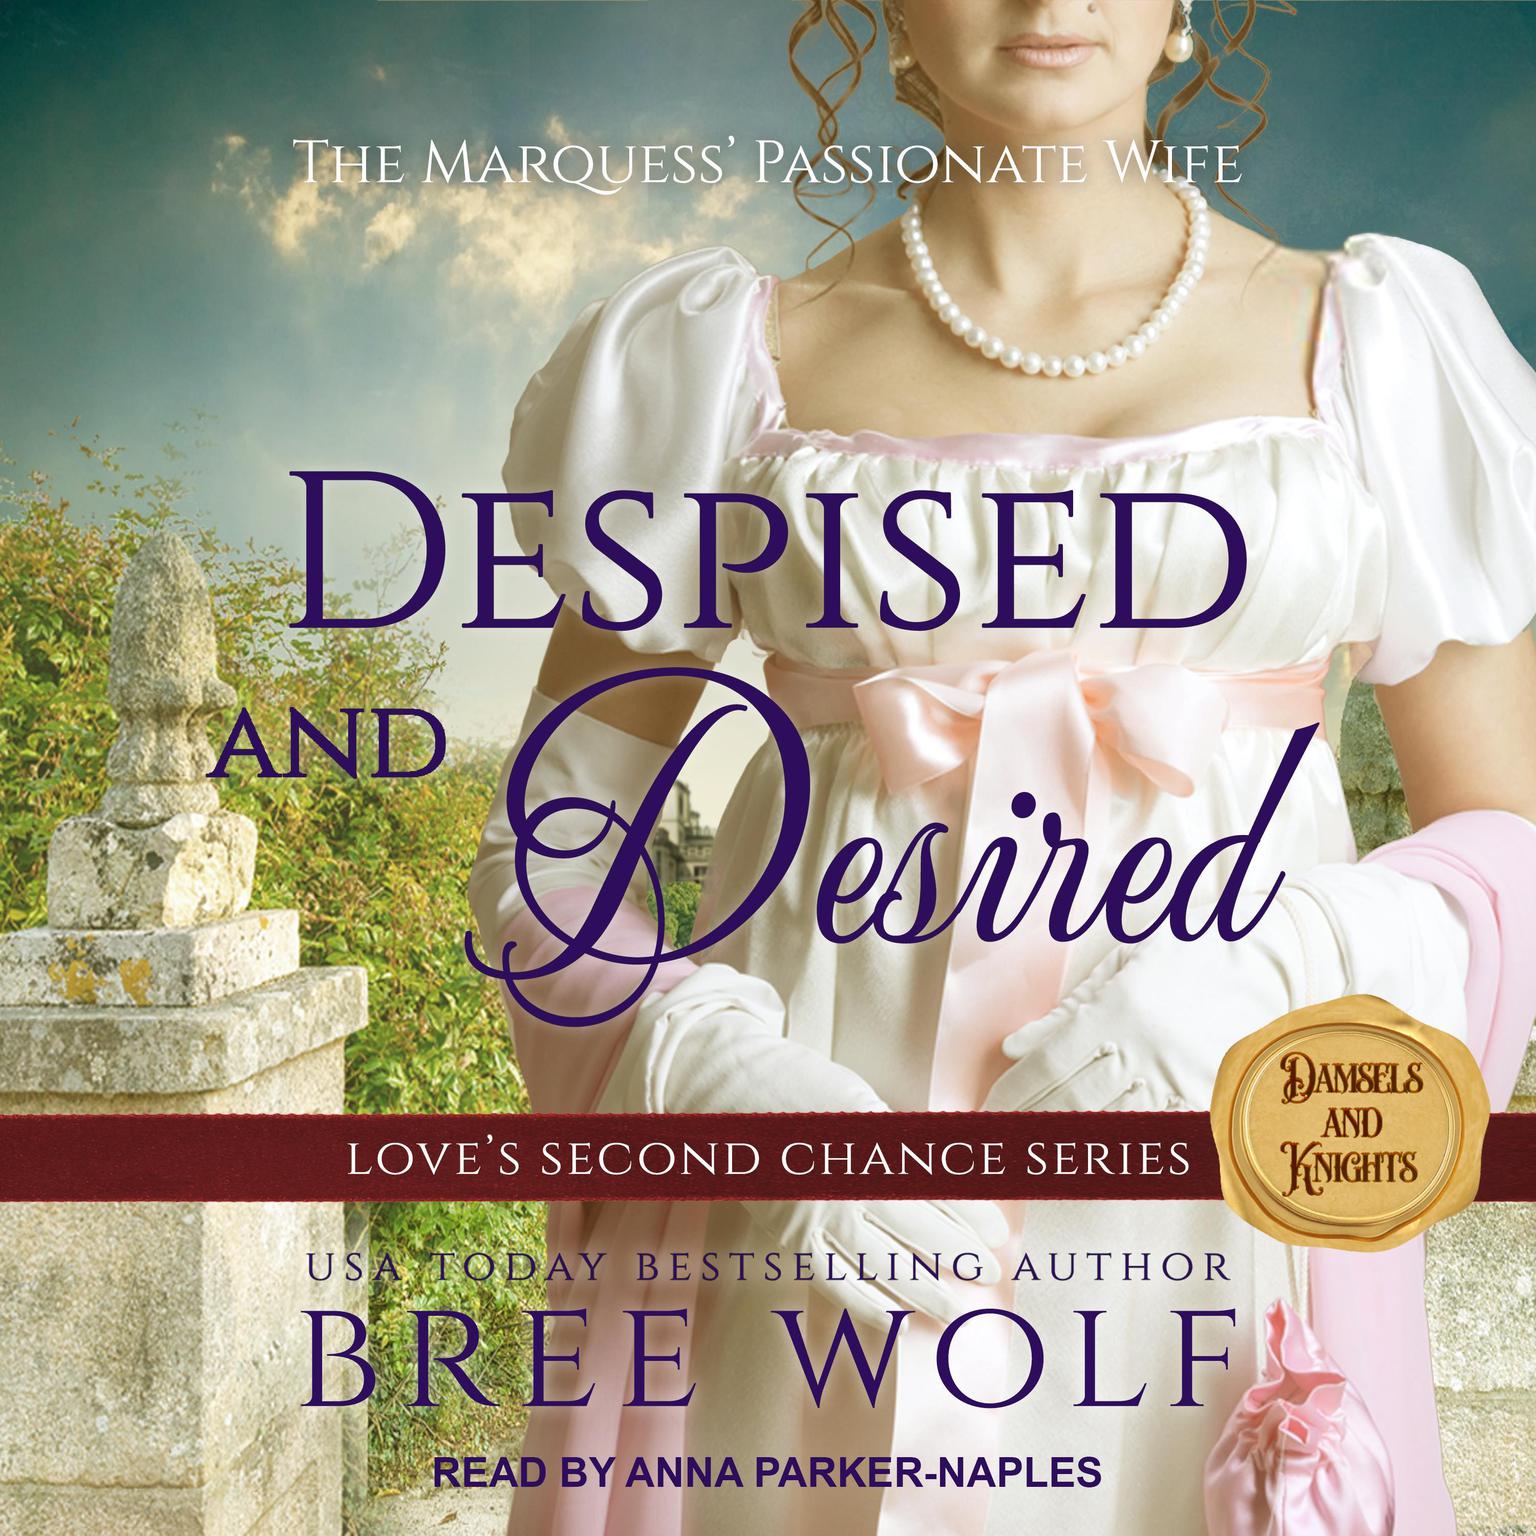 Despised & Desired: The Marquess Passionate Wife Audiobook, by Bree Wolf